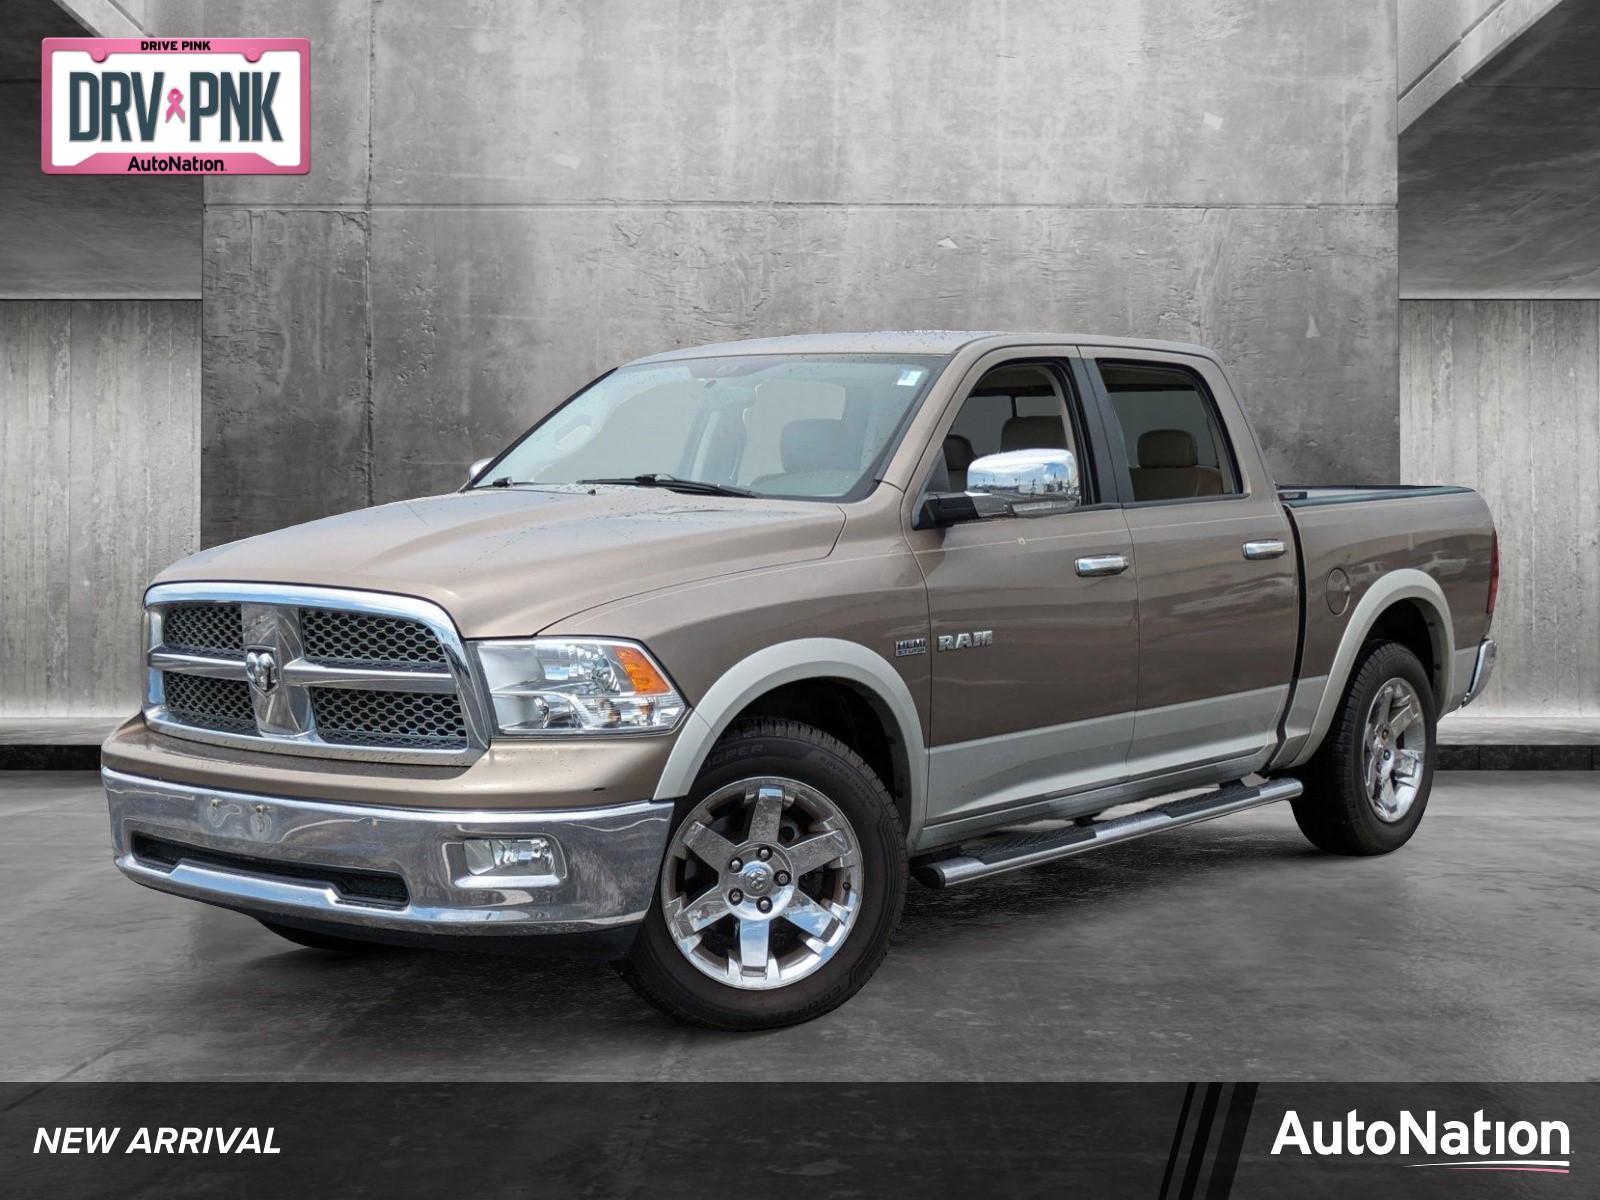 2009 Dodge Ram 1500 Vehicle Photo in CLEARWATER, FL 33764-7163